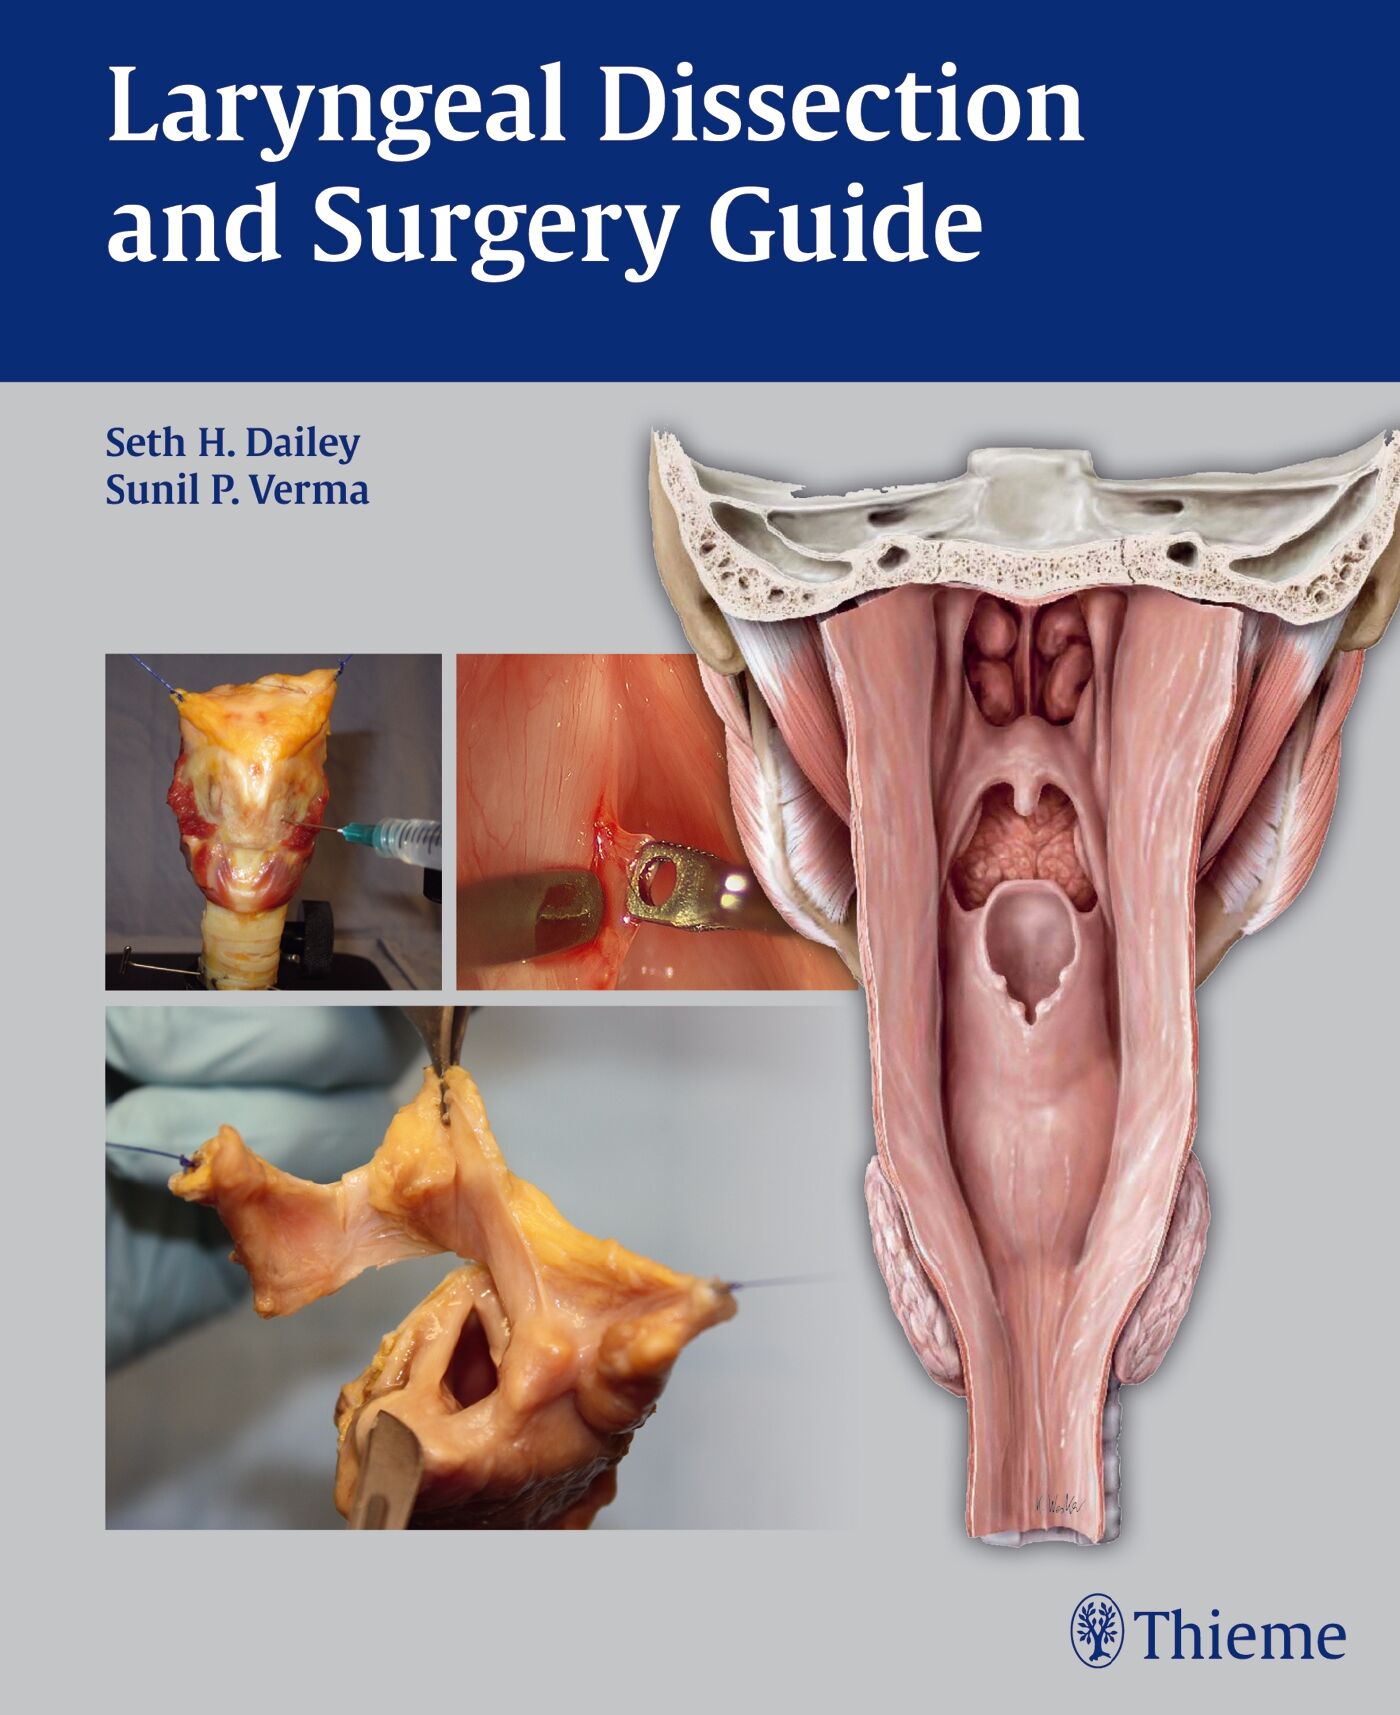 Laryngeal Dissection and Surgery Guide, 9781604065695